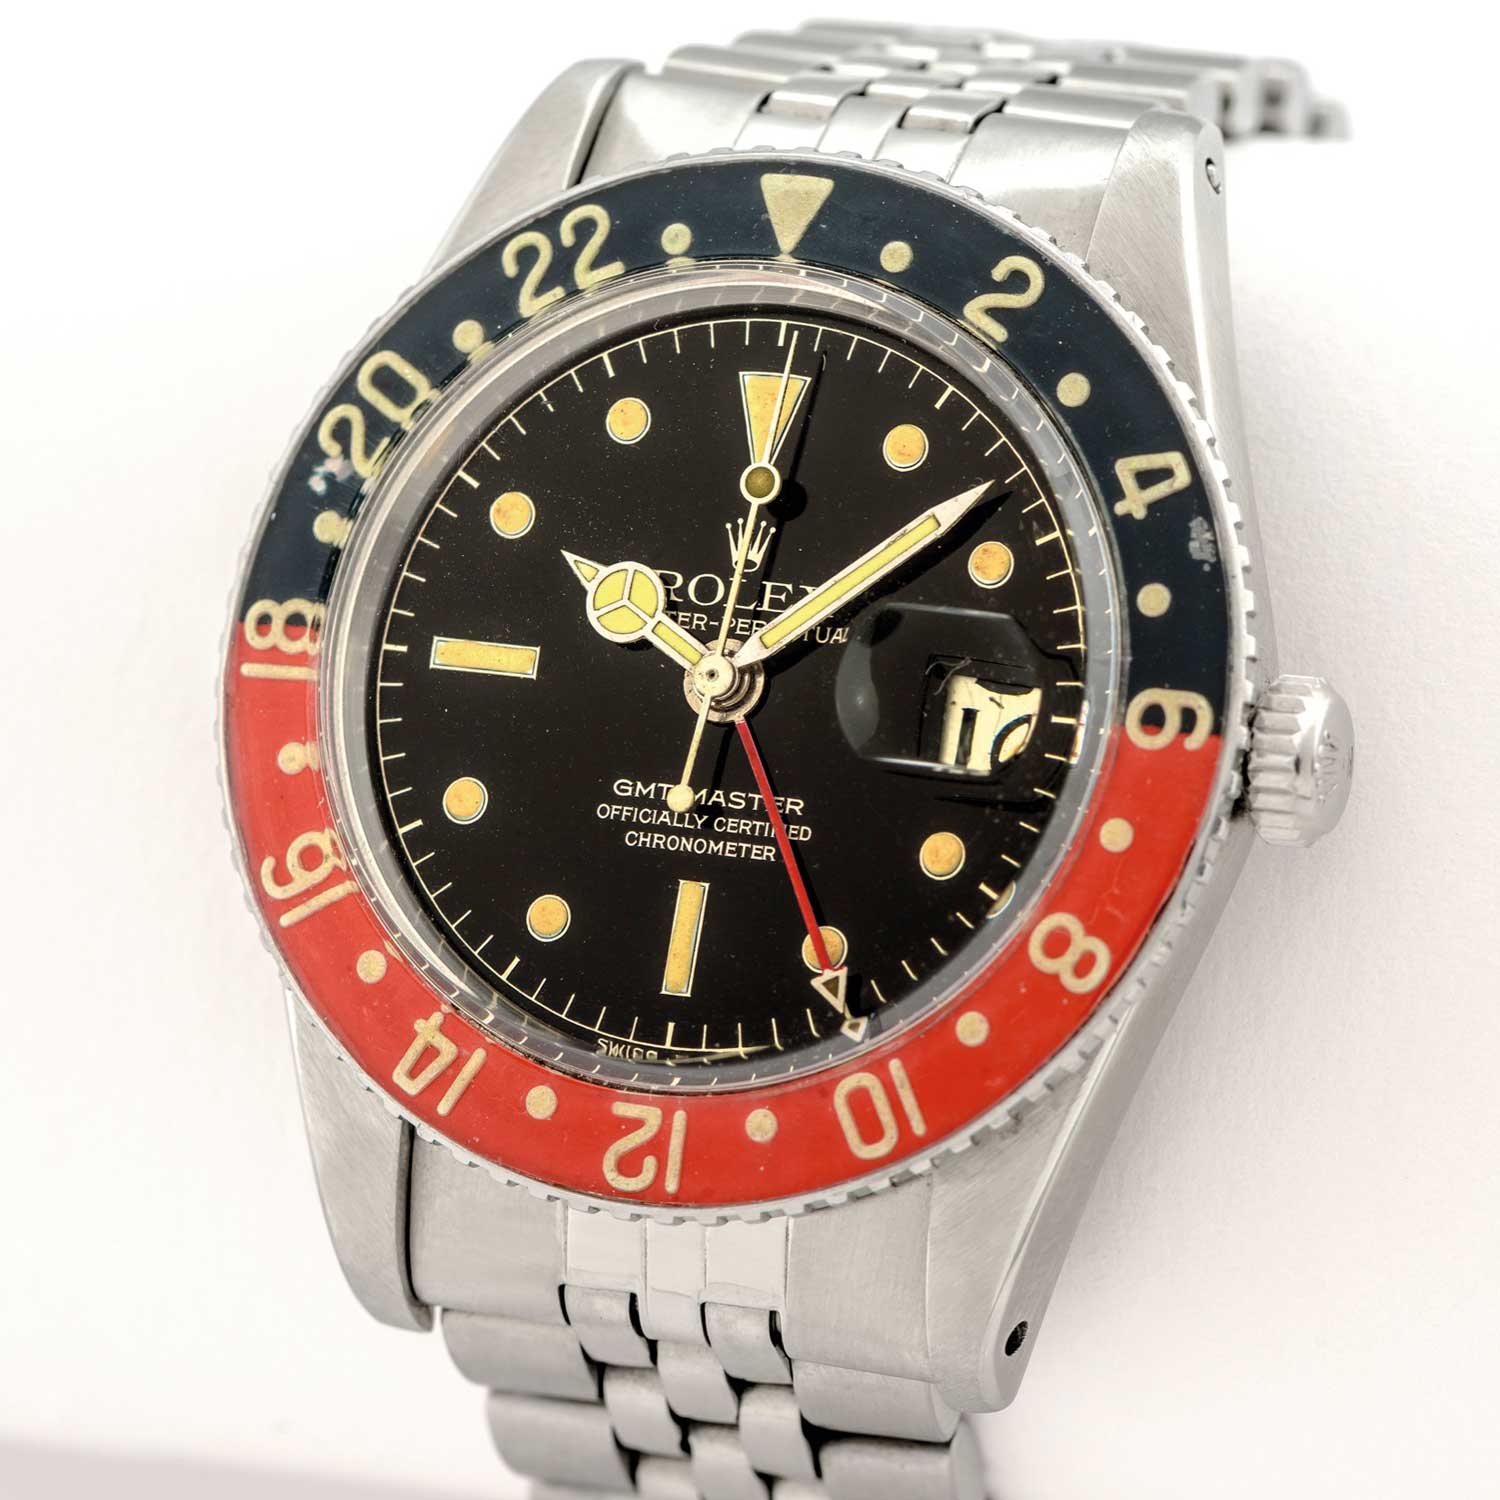 Rolex introduced the GMT-Master reference 6542 in 1954